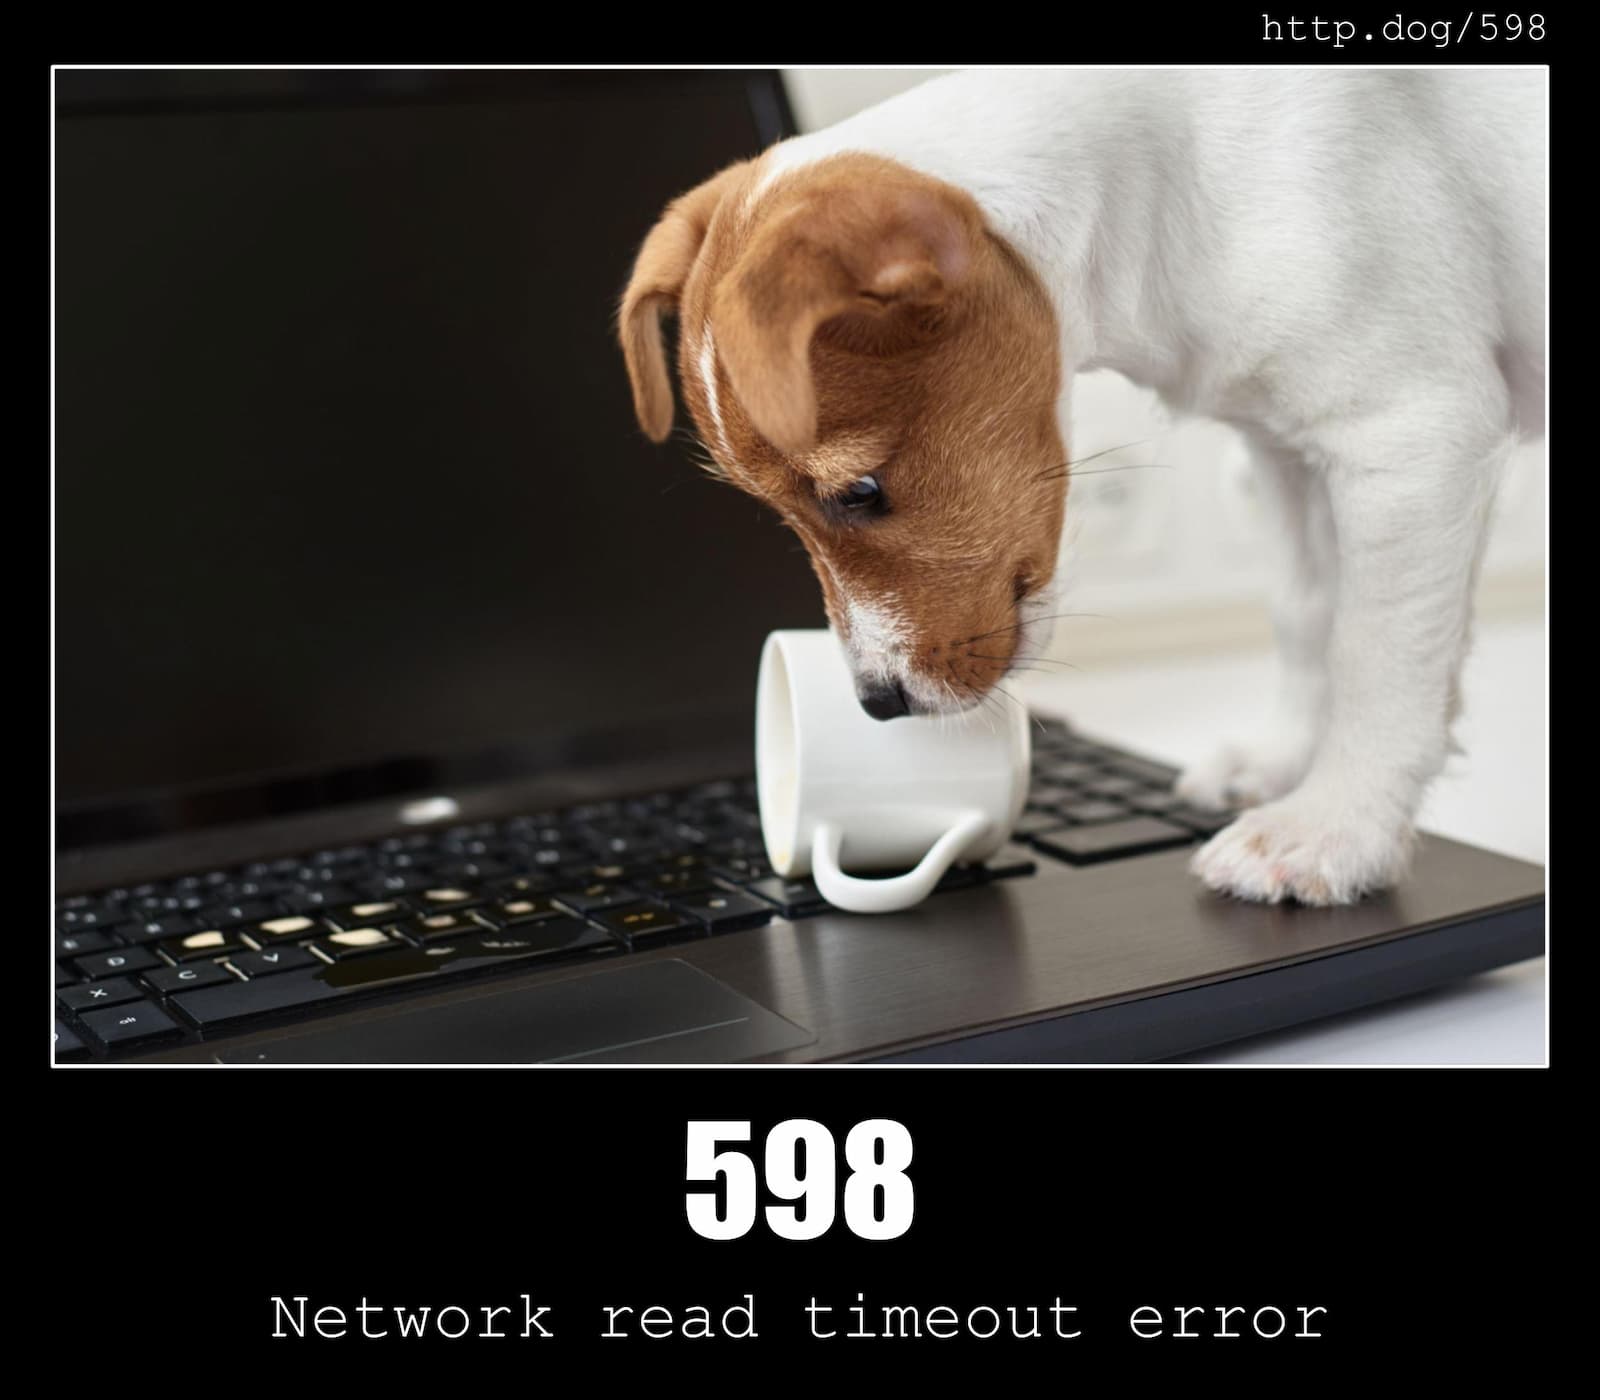 HTTP Status Code 598 Network read timeout error & Dogs